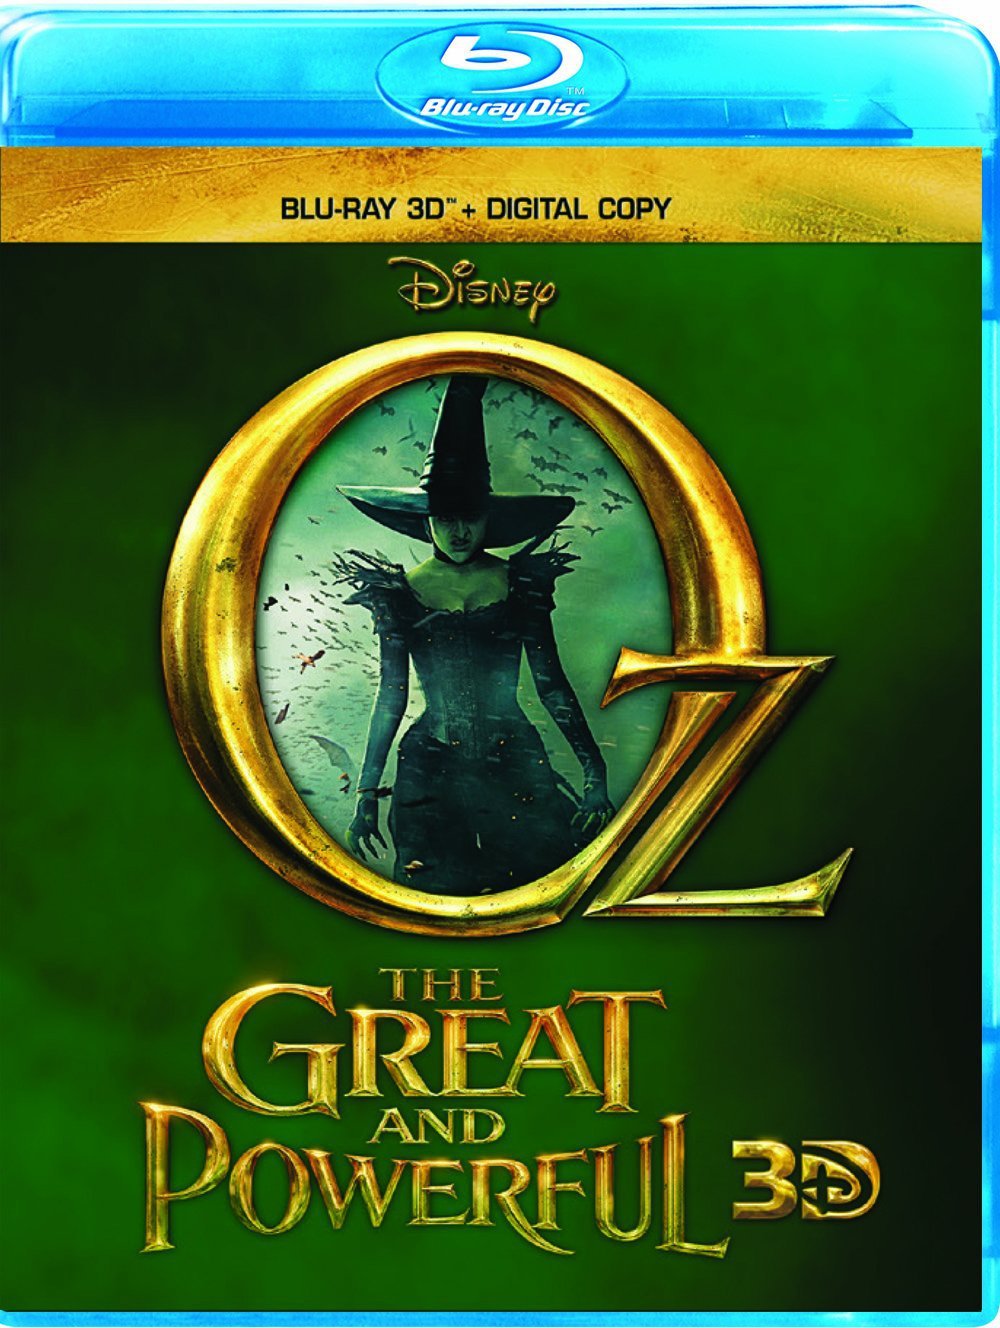 Oz: The Great and Powerful 3D